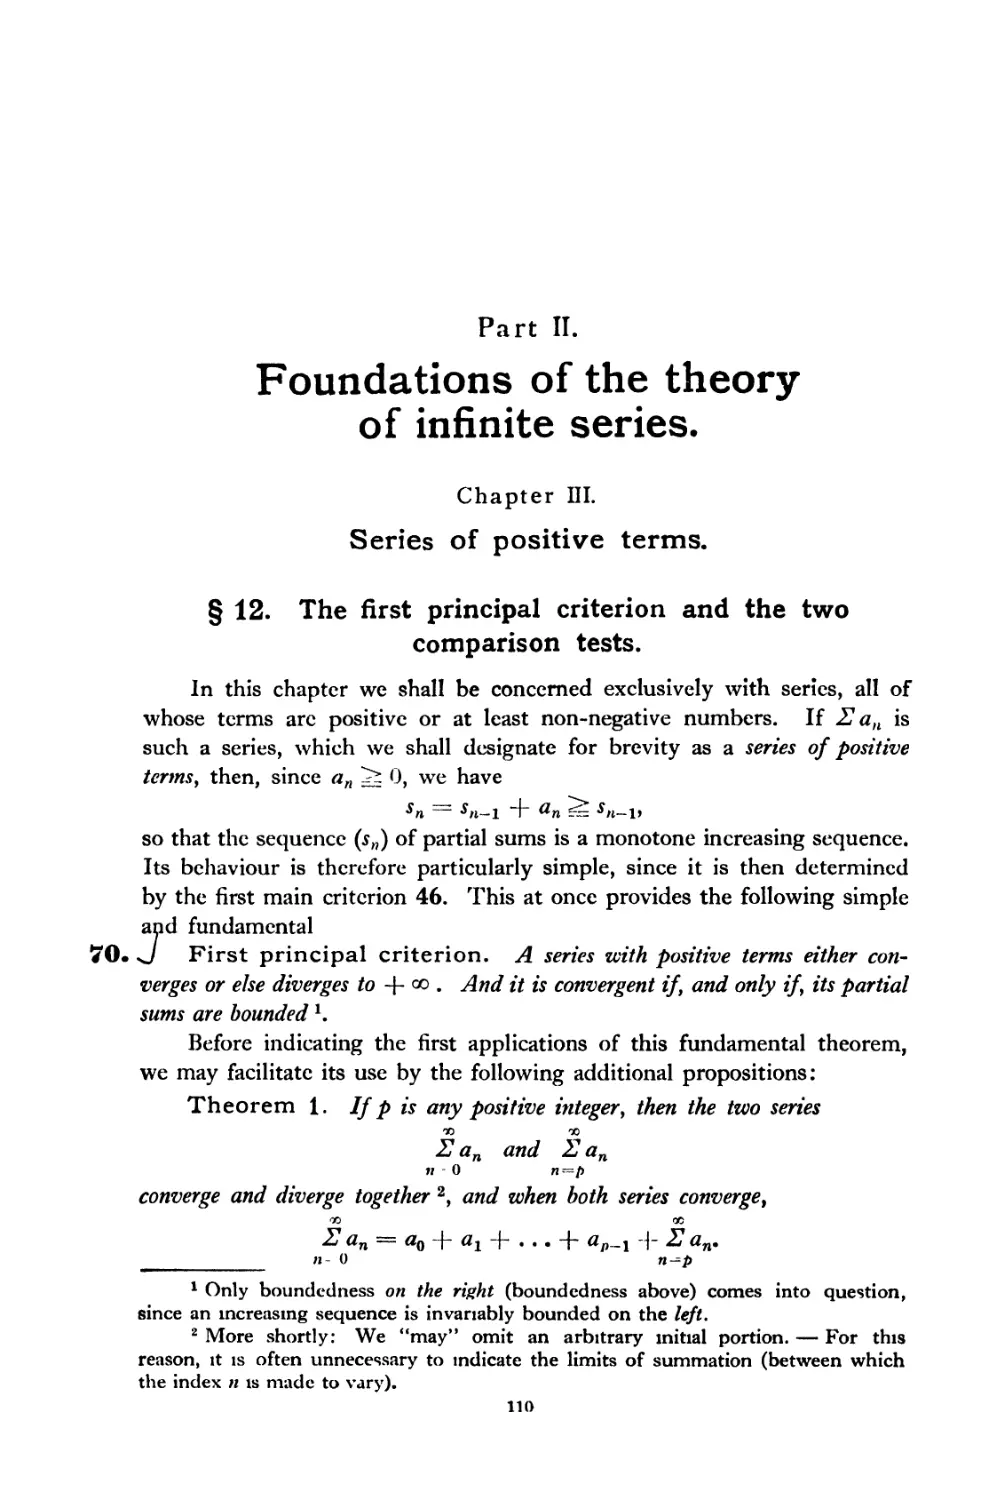 ---------- Part II. Foundations of the theory of infinite series
Chapter III. Series of positive terms